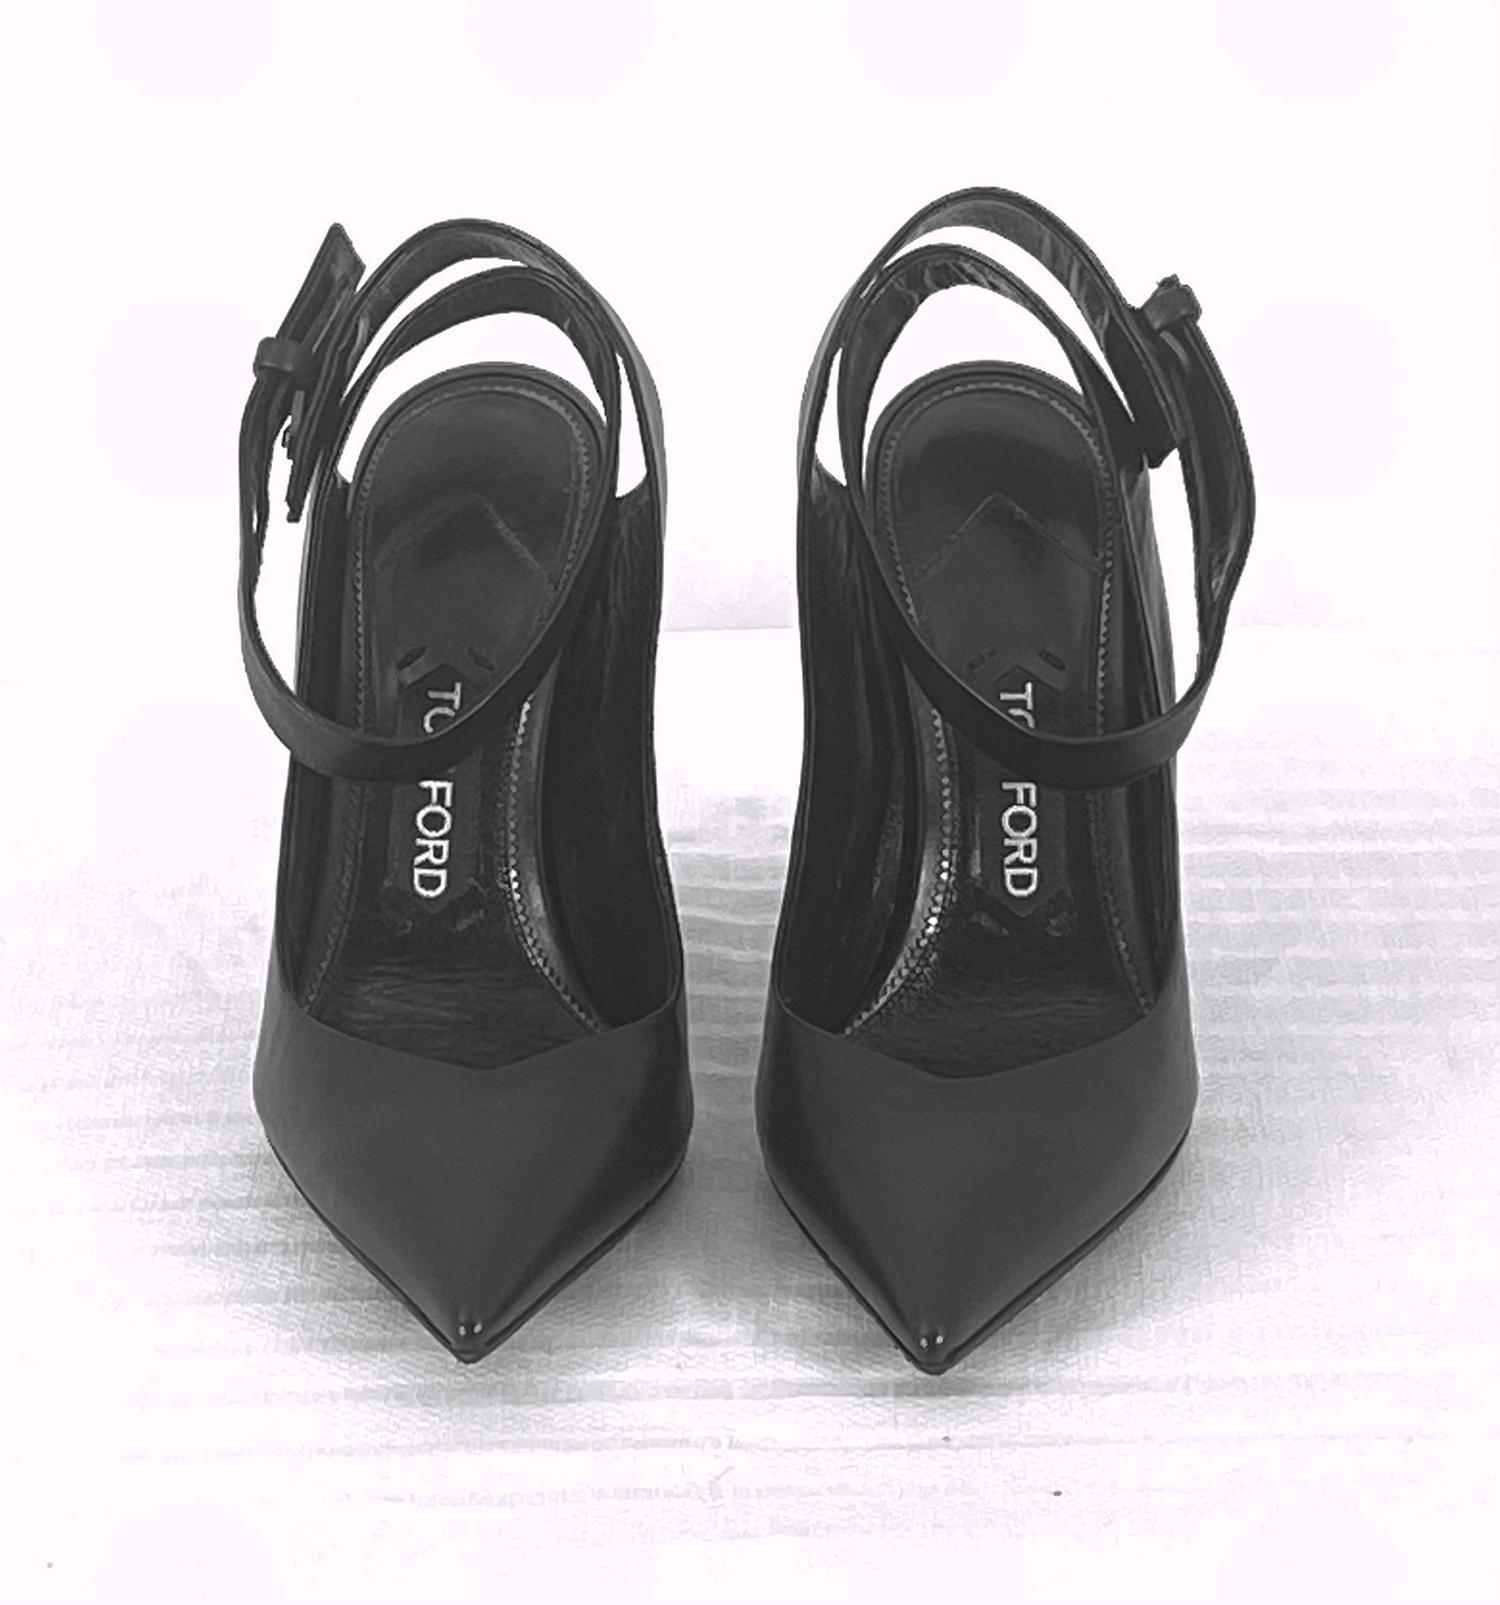 Tom Ford Black Calf Wedge Heel Ankle Strap High Heels 39 In Excellent Condition For Sale In West Palm Beach, FL